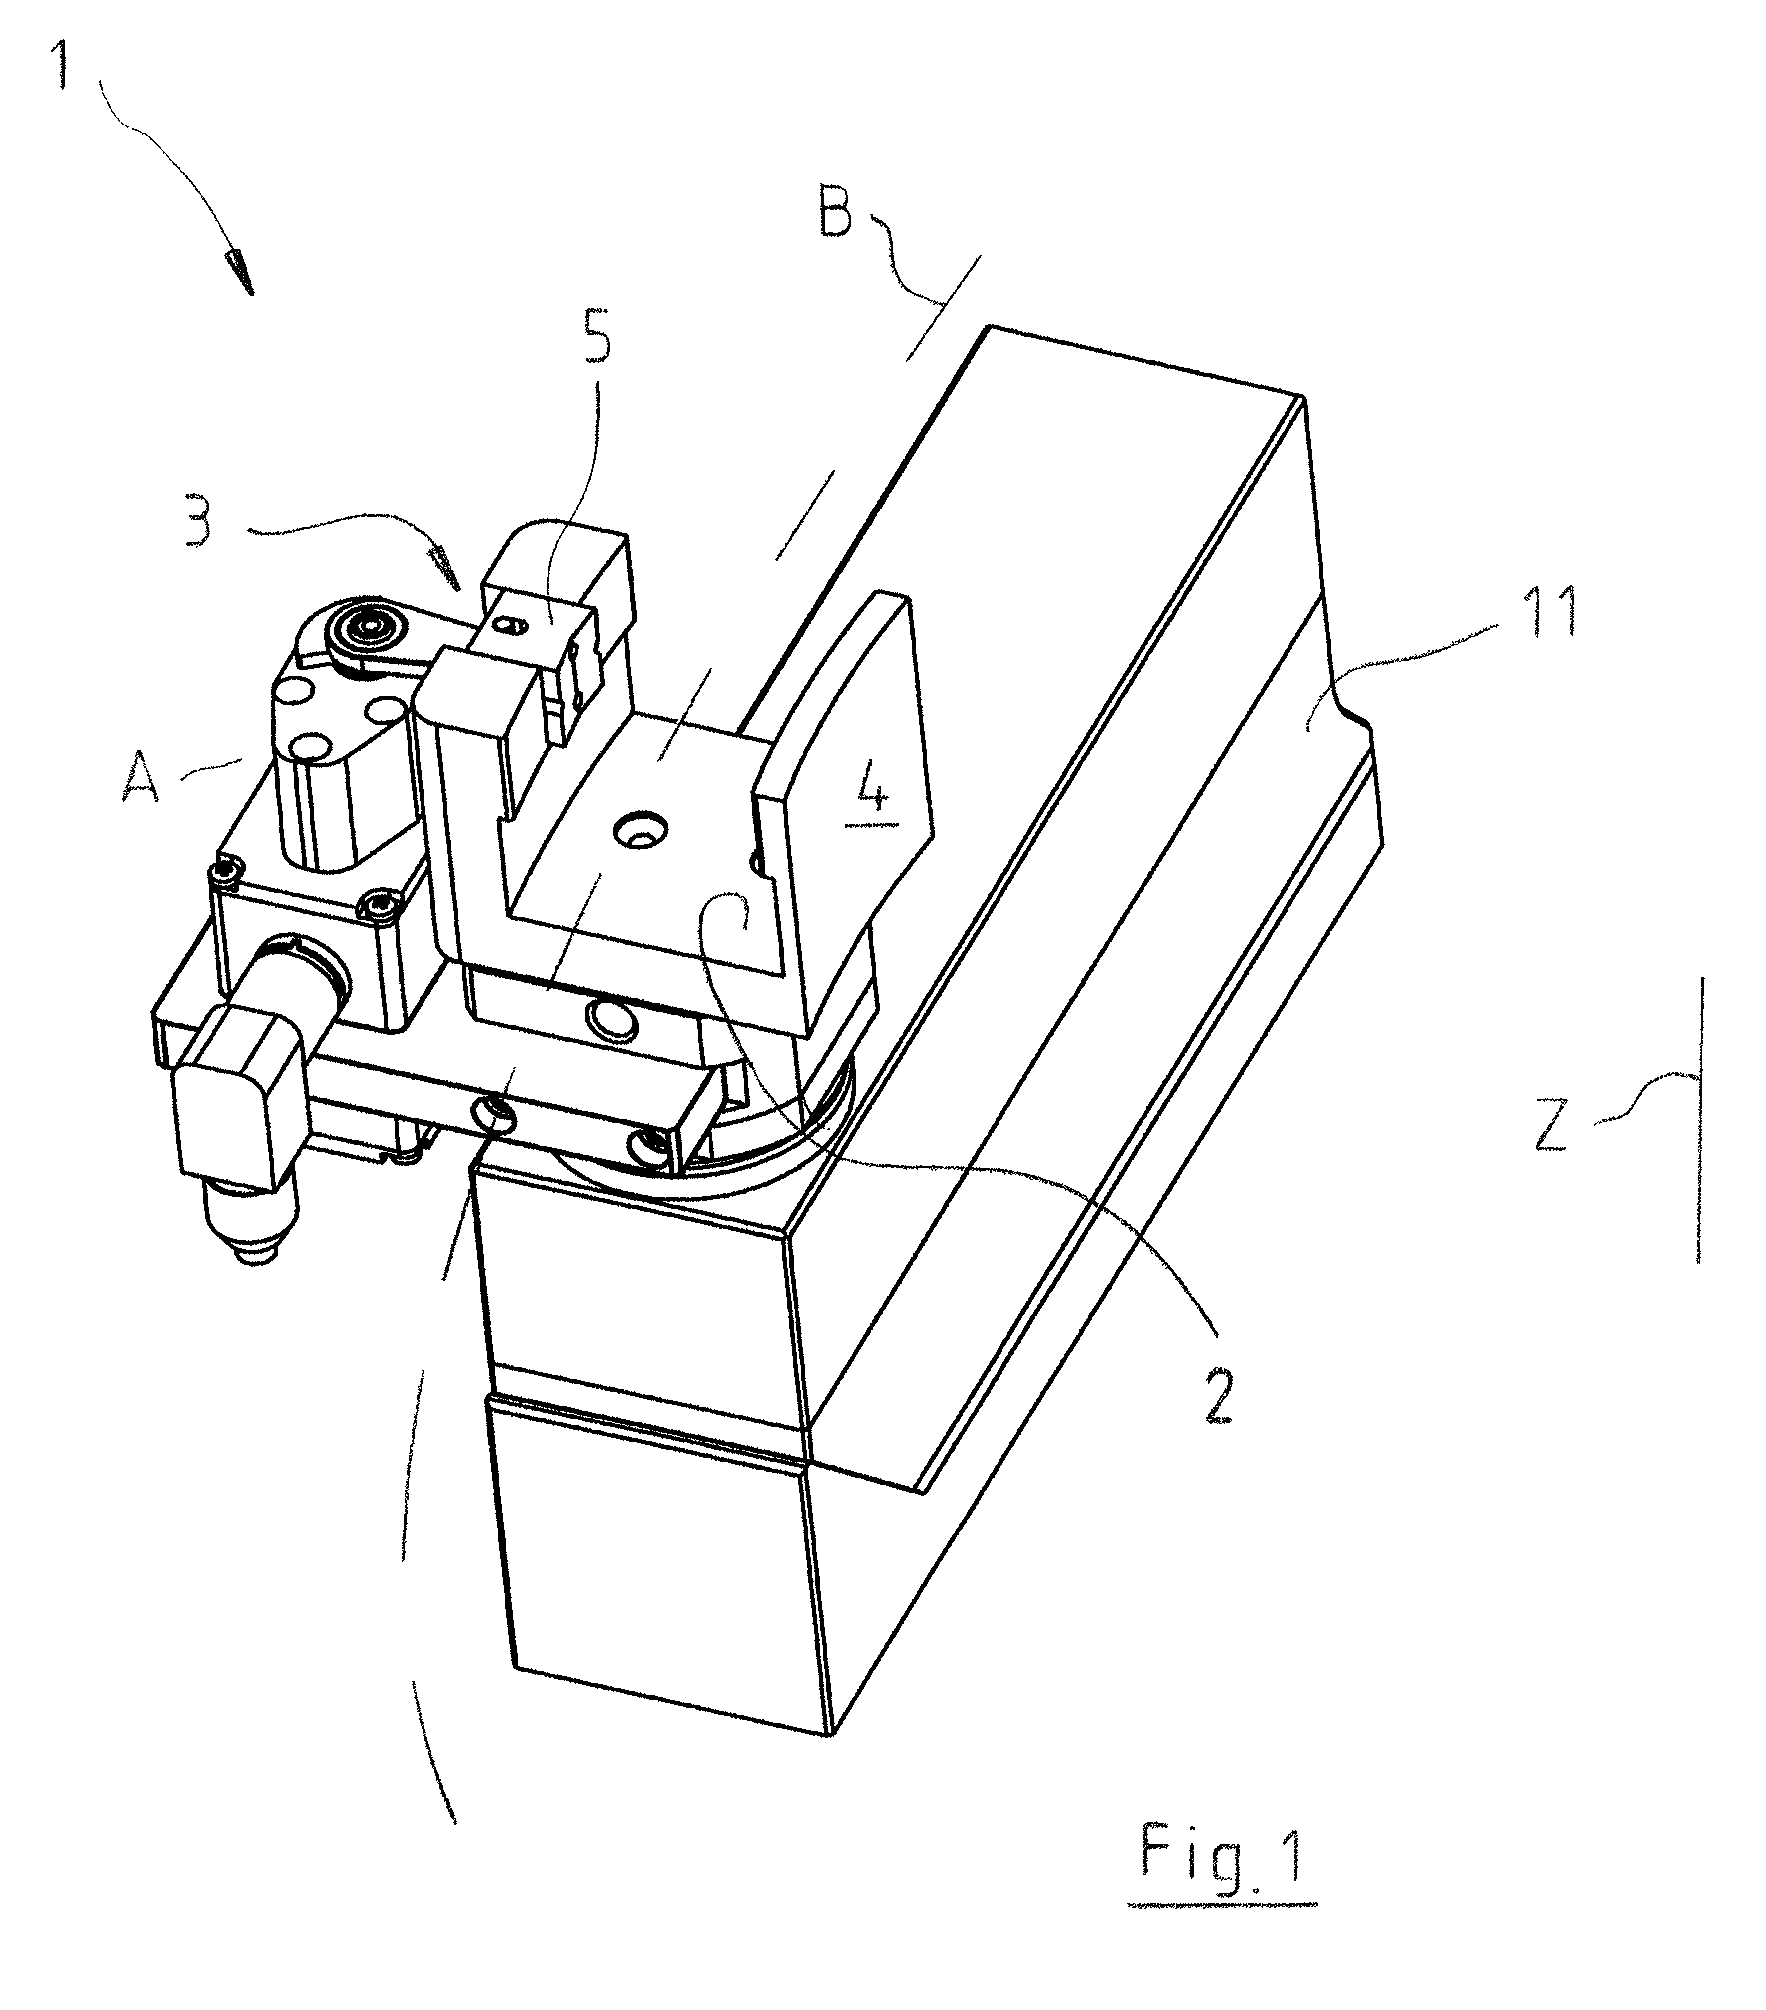 Weighing system including a preload weighing table and clamping device for weighing sequentially fed items